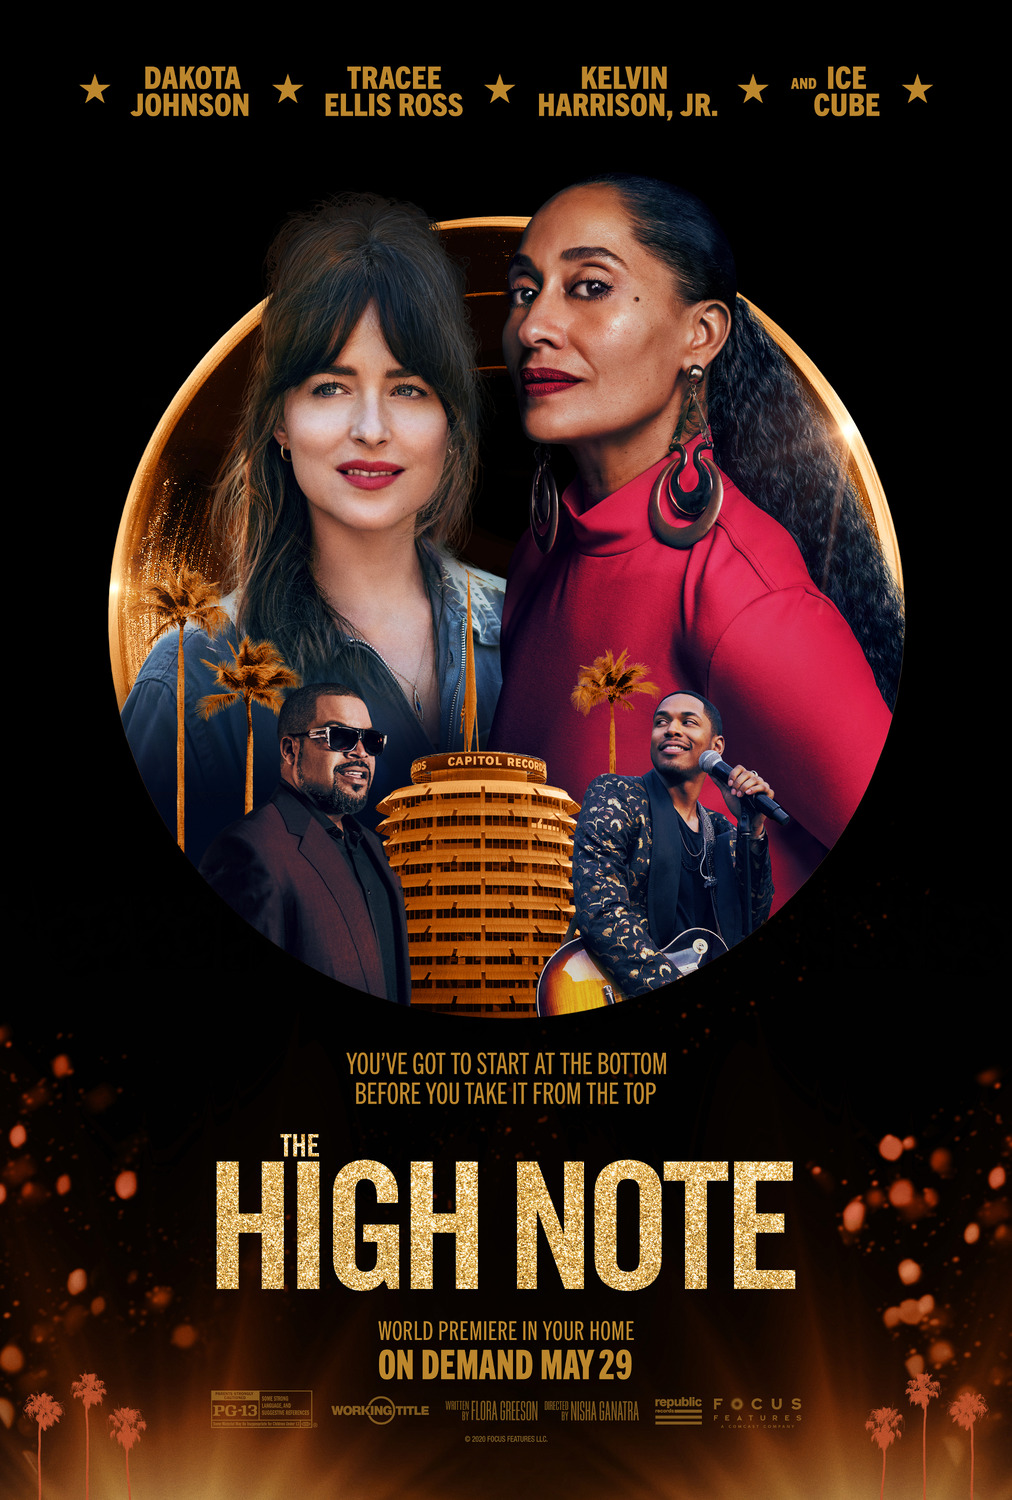 The High Note 2020 Full Movie Online In Hd Quality